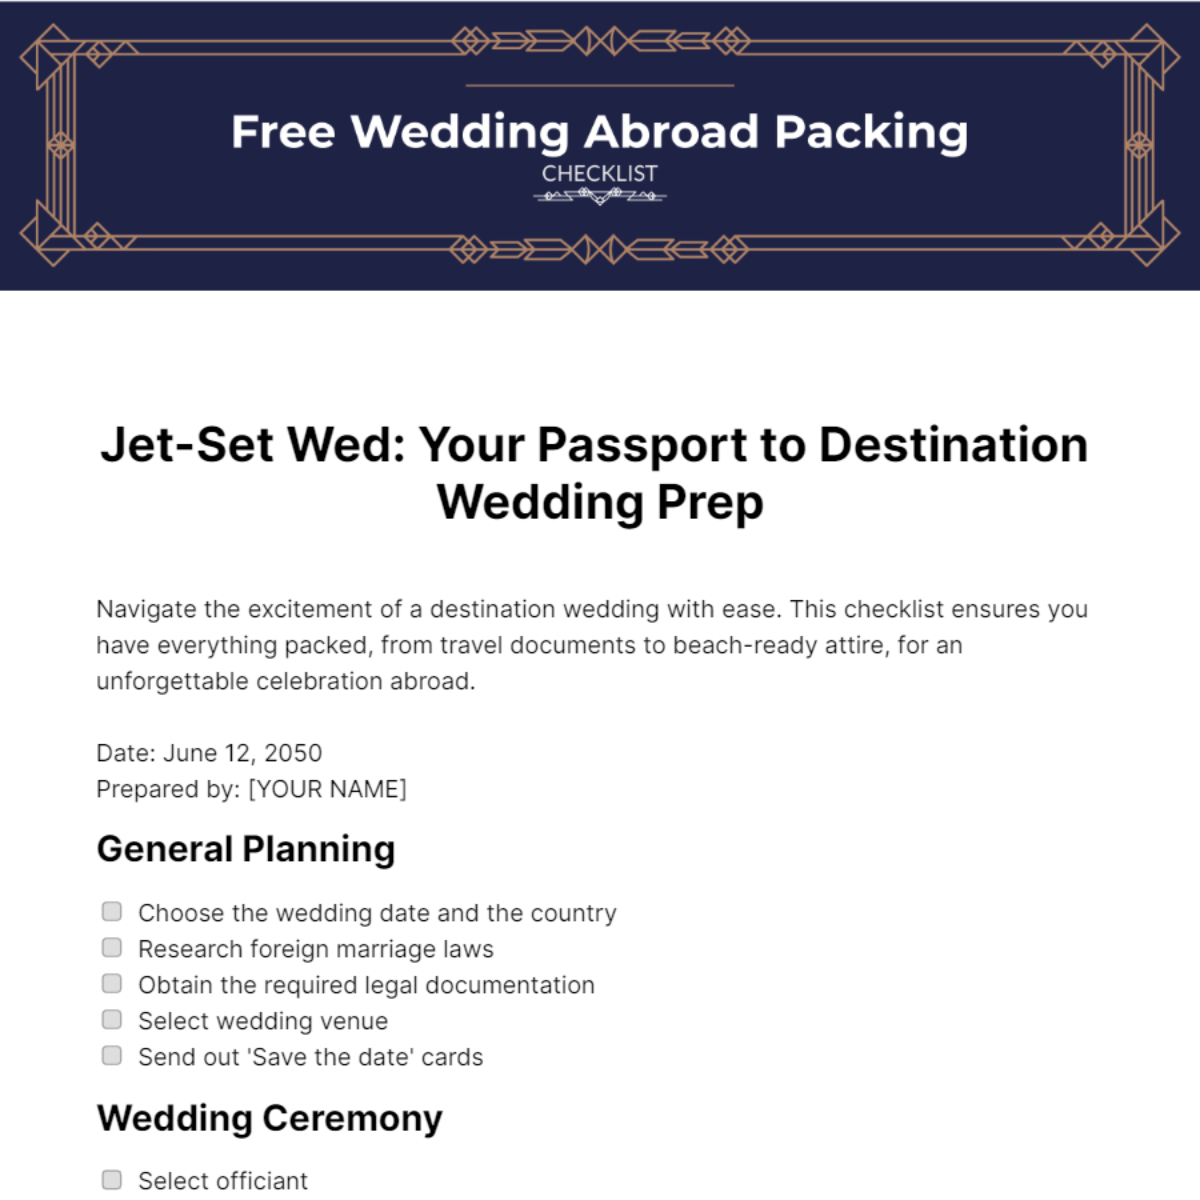 Wedding Abroad Packing Checklist Template